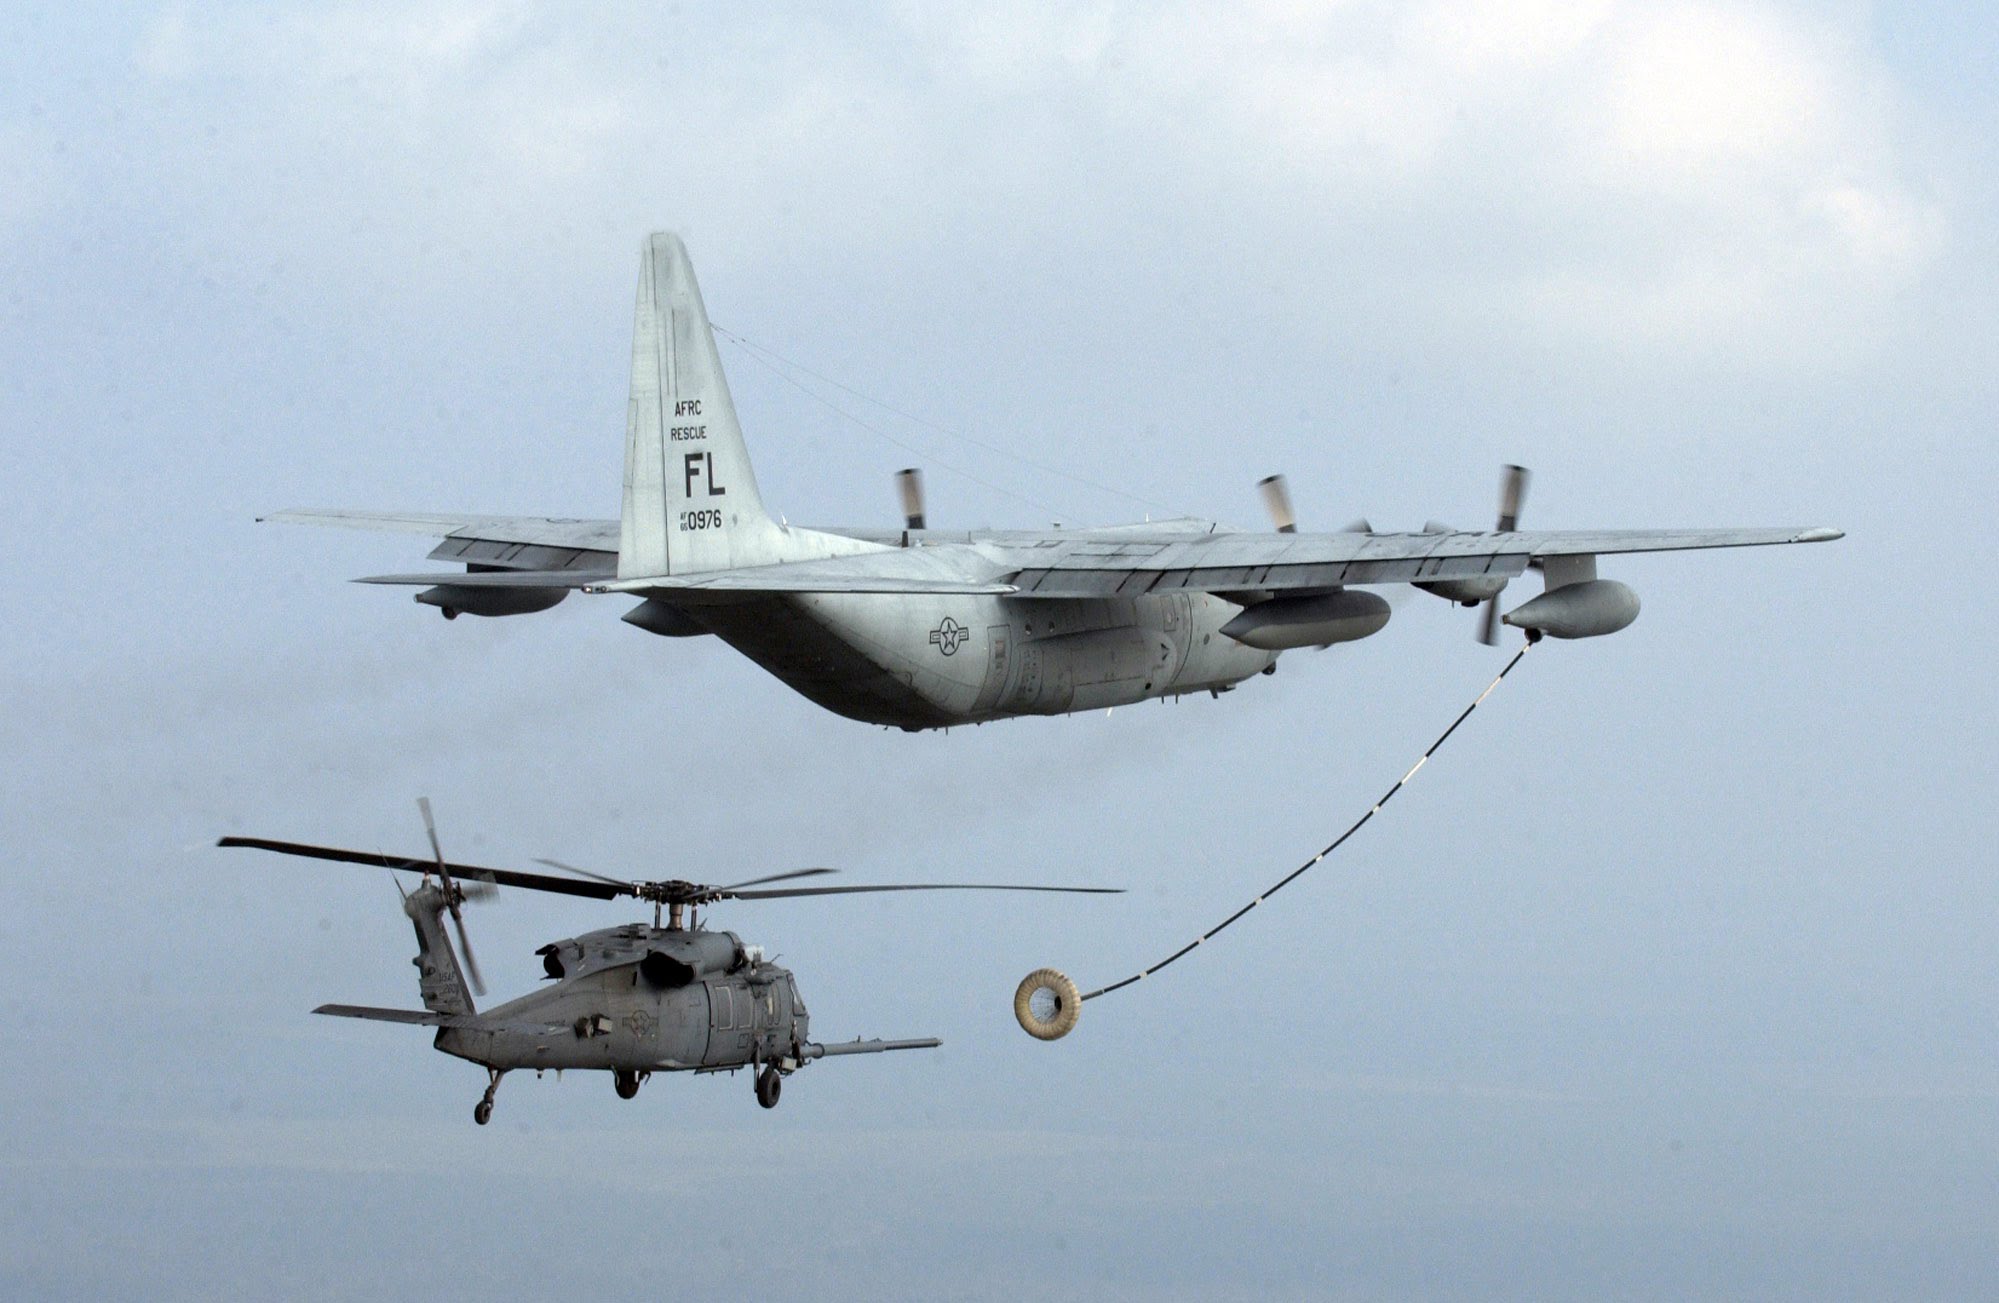 air refueling | Helicopter aerial refueling - YouTube